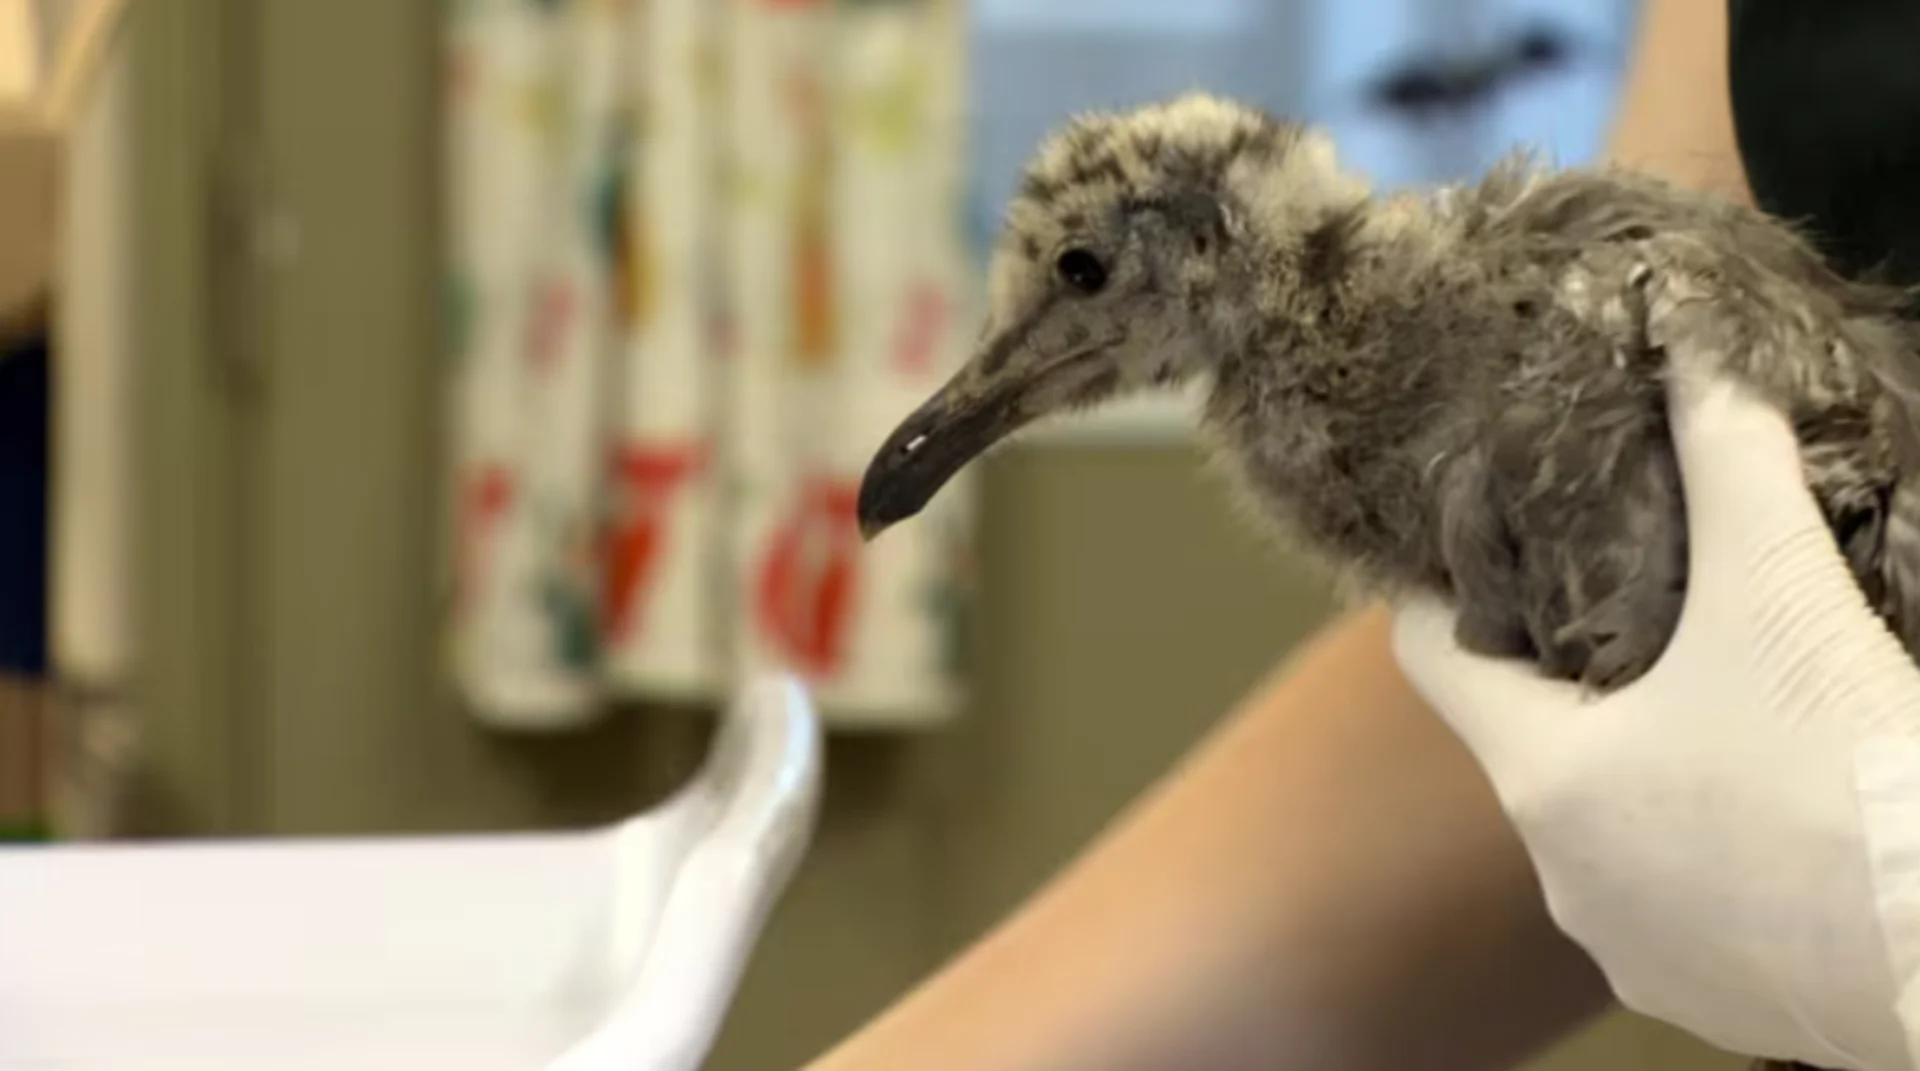 Baby gulls rescued after falling, jumping from nests in heat wave